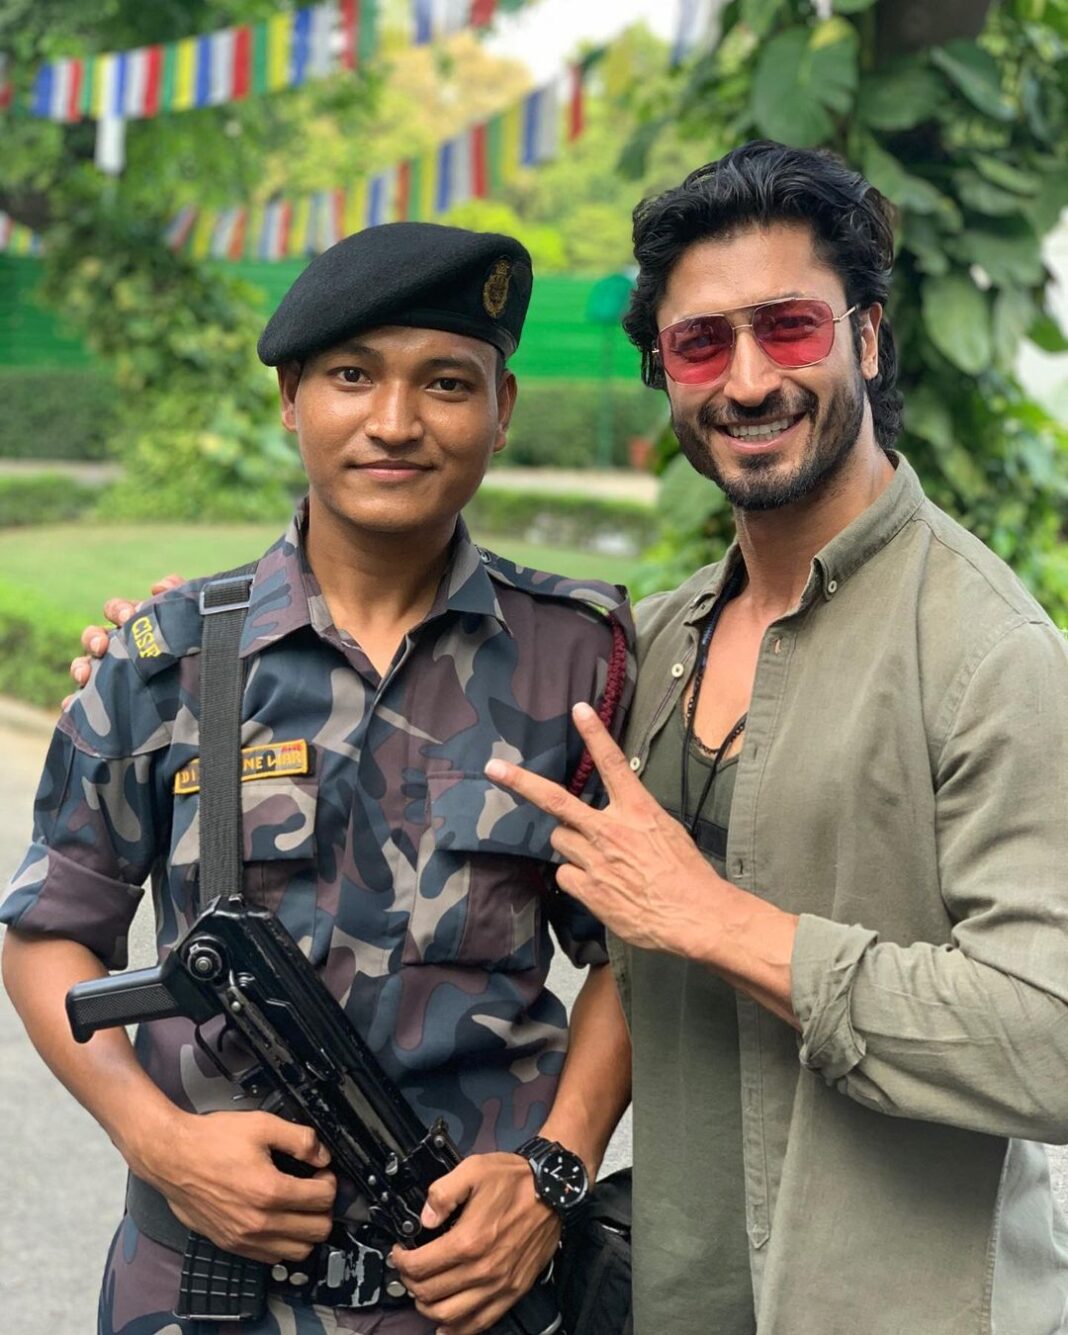 Vidyut Jammwal Instagram - While waiting for a friend ,this CISF soldier approached me and praised me for my martial arts skills and movies. We meet these brave men and woman who serve the armed forces mostly at airports,power plants ,oil fields etc..They work diligently and unhurriedly to ensure our safety and sometimes are met with either indifference or irritability as we go about our lives. They deserve our patience, courtesy and respect for tirelessly working to keep us secure. Respect and deep gratitude to him and all the forces for their commitment to the country and citizens . I couldn’t let him leave my presence without thanking him for his sacrificial service towards our country .. Salute CISF and the armed forces @official_cisf @amitshahofficial @kiren.rijiju @indianarmy.adgpi